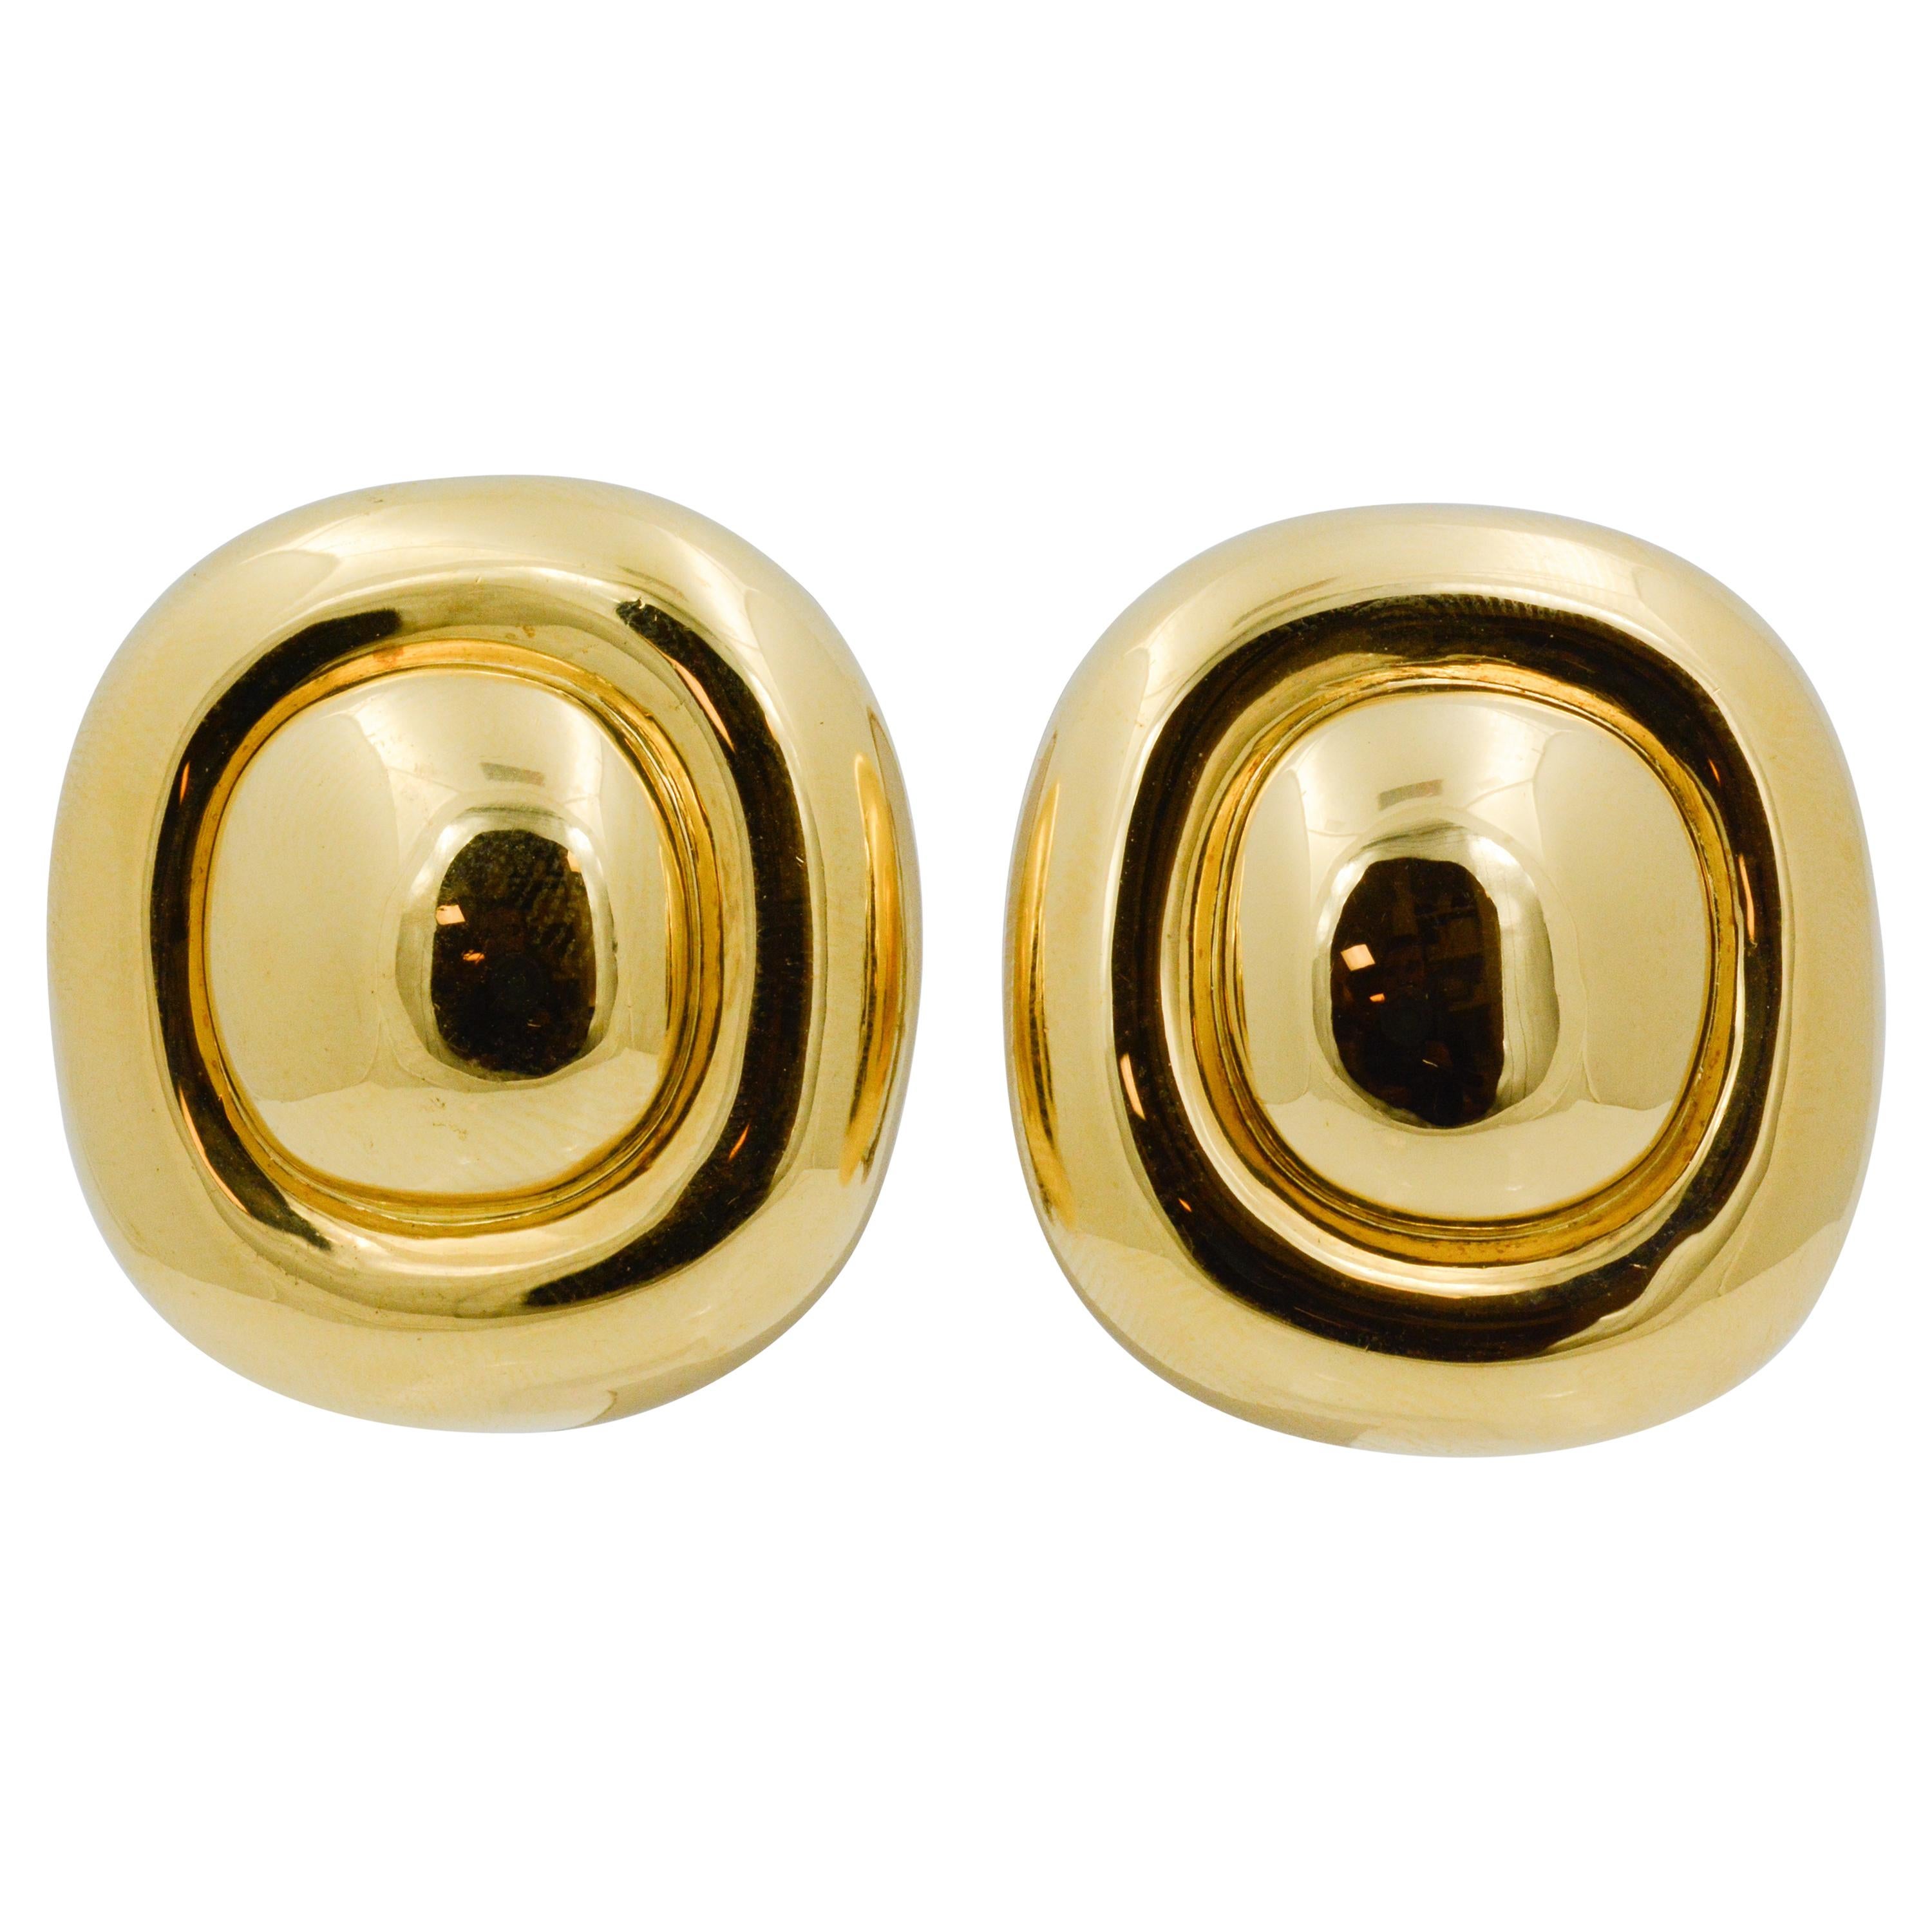 Here's a dazzling pair of 18 karat yellow gold cushion shape earrings from the late 20th century. When it's time to get dressed up for the office, why not slip on these classy earrings with 18 Karat white gold posts and Omega clip backs. Earrings